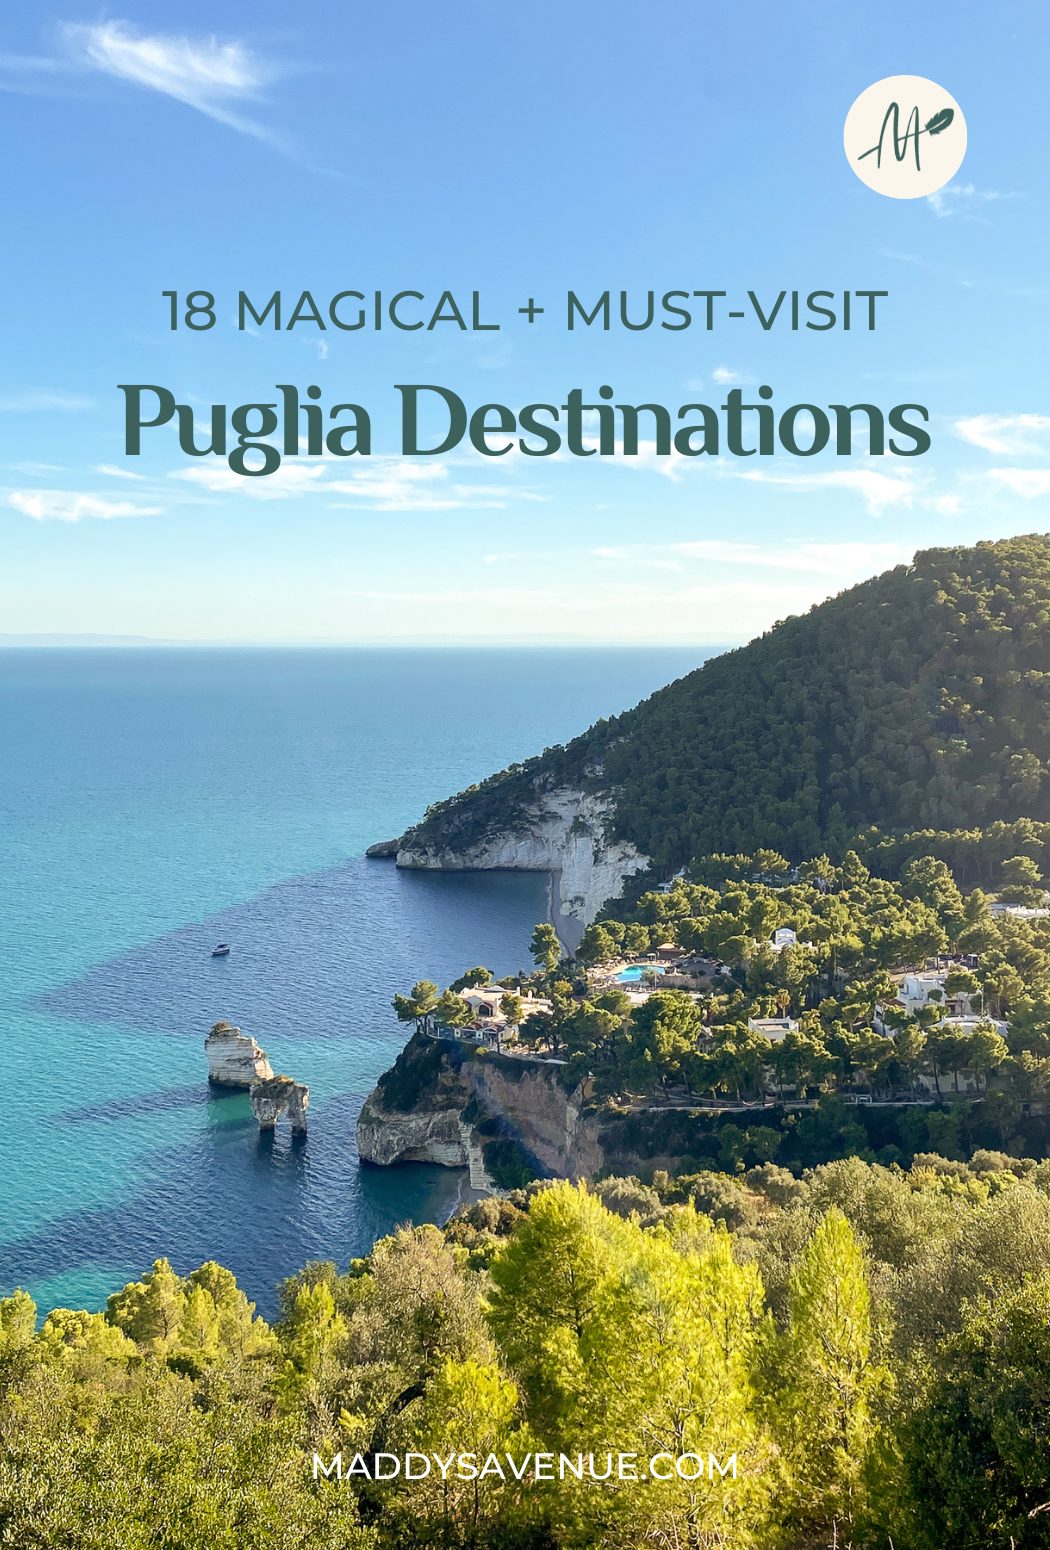 Wondering where to go in the magical, sun-drenched region of Puglia, Italy? Trying to decide which Puglia destinations are worth adding to your Puglia itinerary? After spending three months in Puglia, exploring with my Pugliese boyfriend, I've filled this guide with all the best places to visit in Puglia, Italy. From historic towns like Ostuni and Alberobello, to coastal towns such as Polignano a Mare, to the beechwood forests of Gargano, this guide is full of Puglia's must-sees and hidden gems!